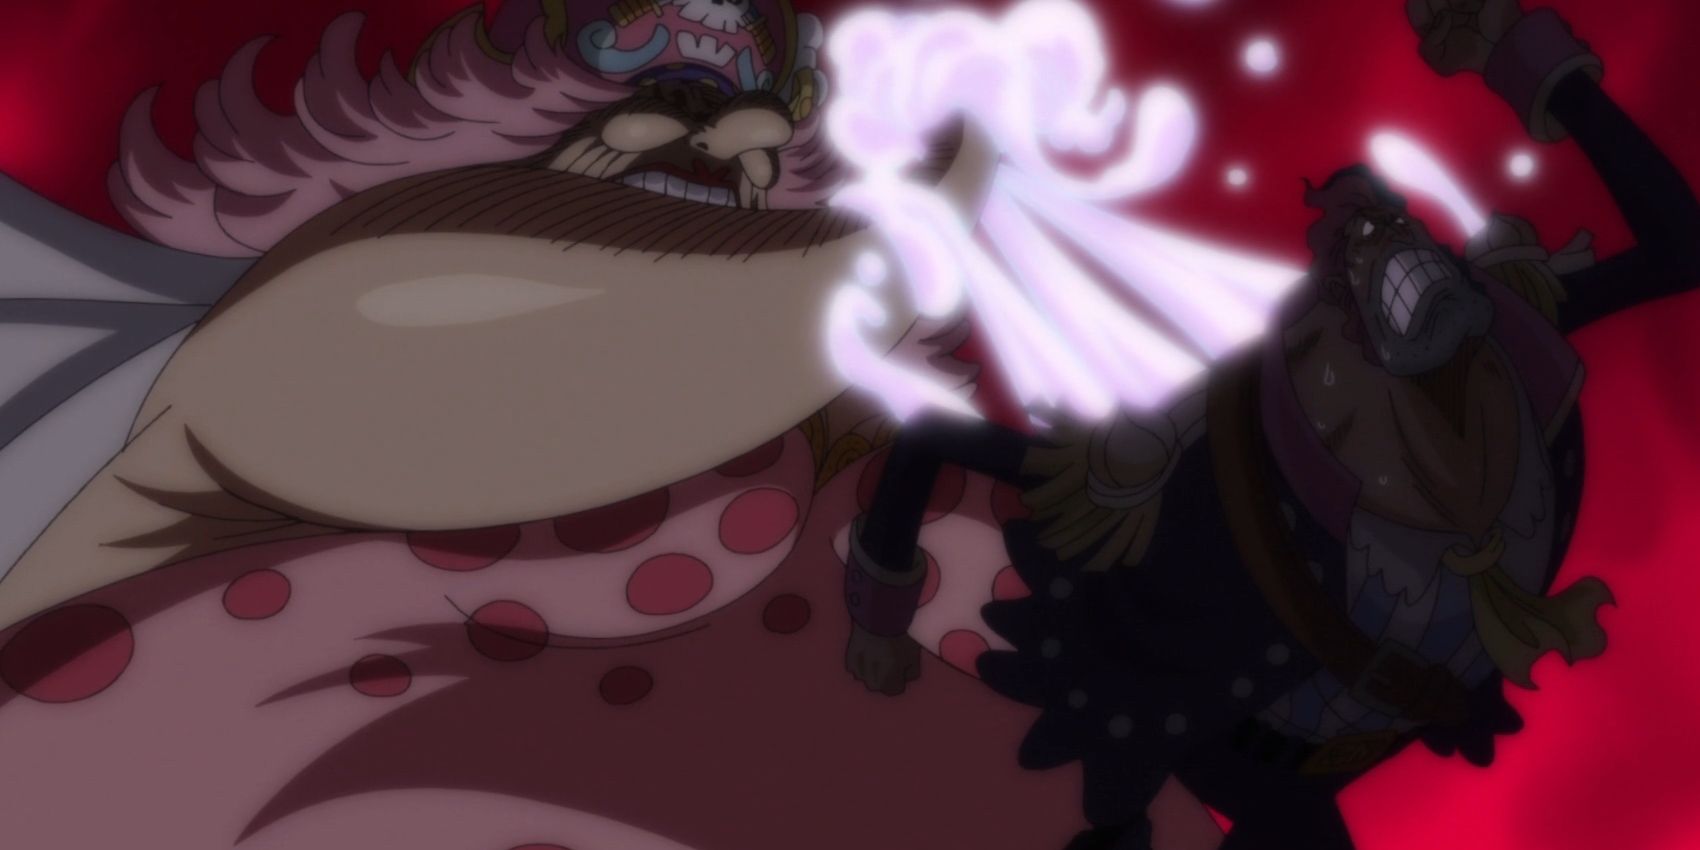 Big Mom steals someone's soul in One Piece.